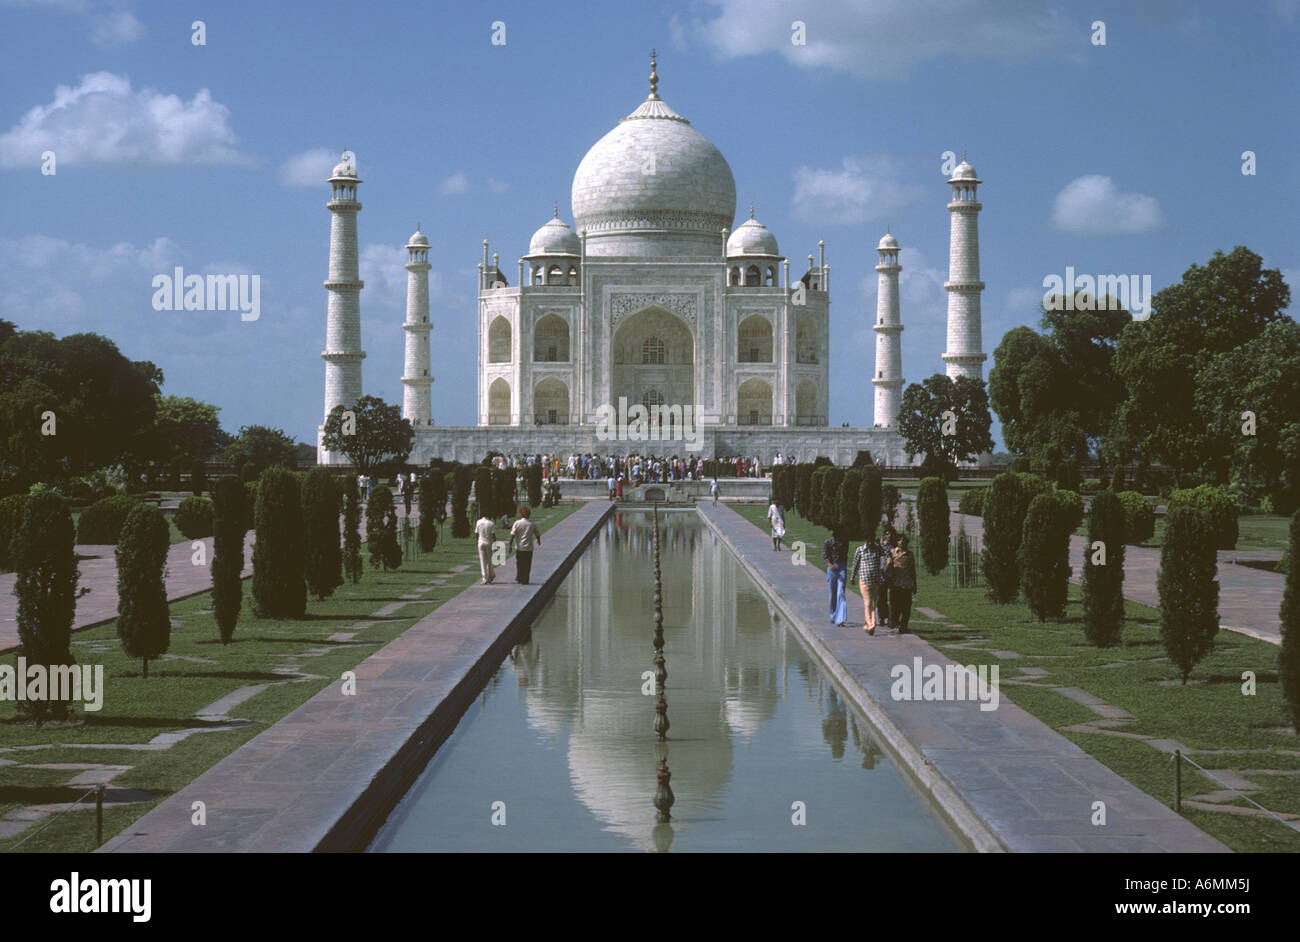 The Taj Mahal or Crown Palace India s most famous architectural wonder A white marble mausoleum built 1631 48 in Agra Stock Photo